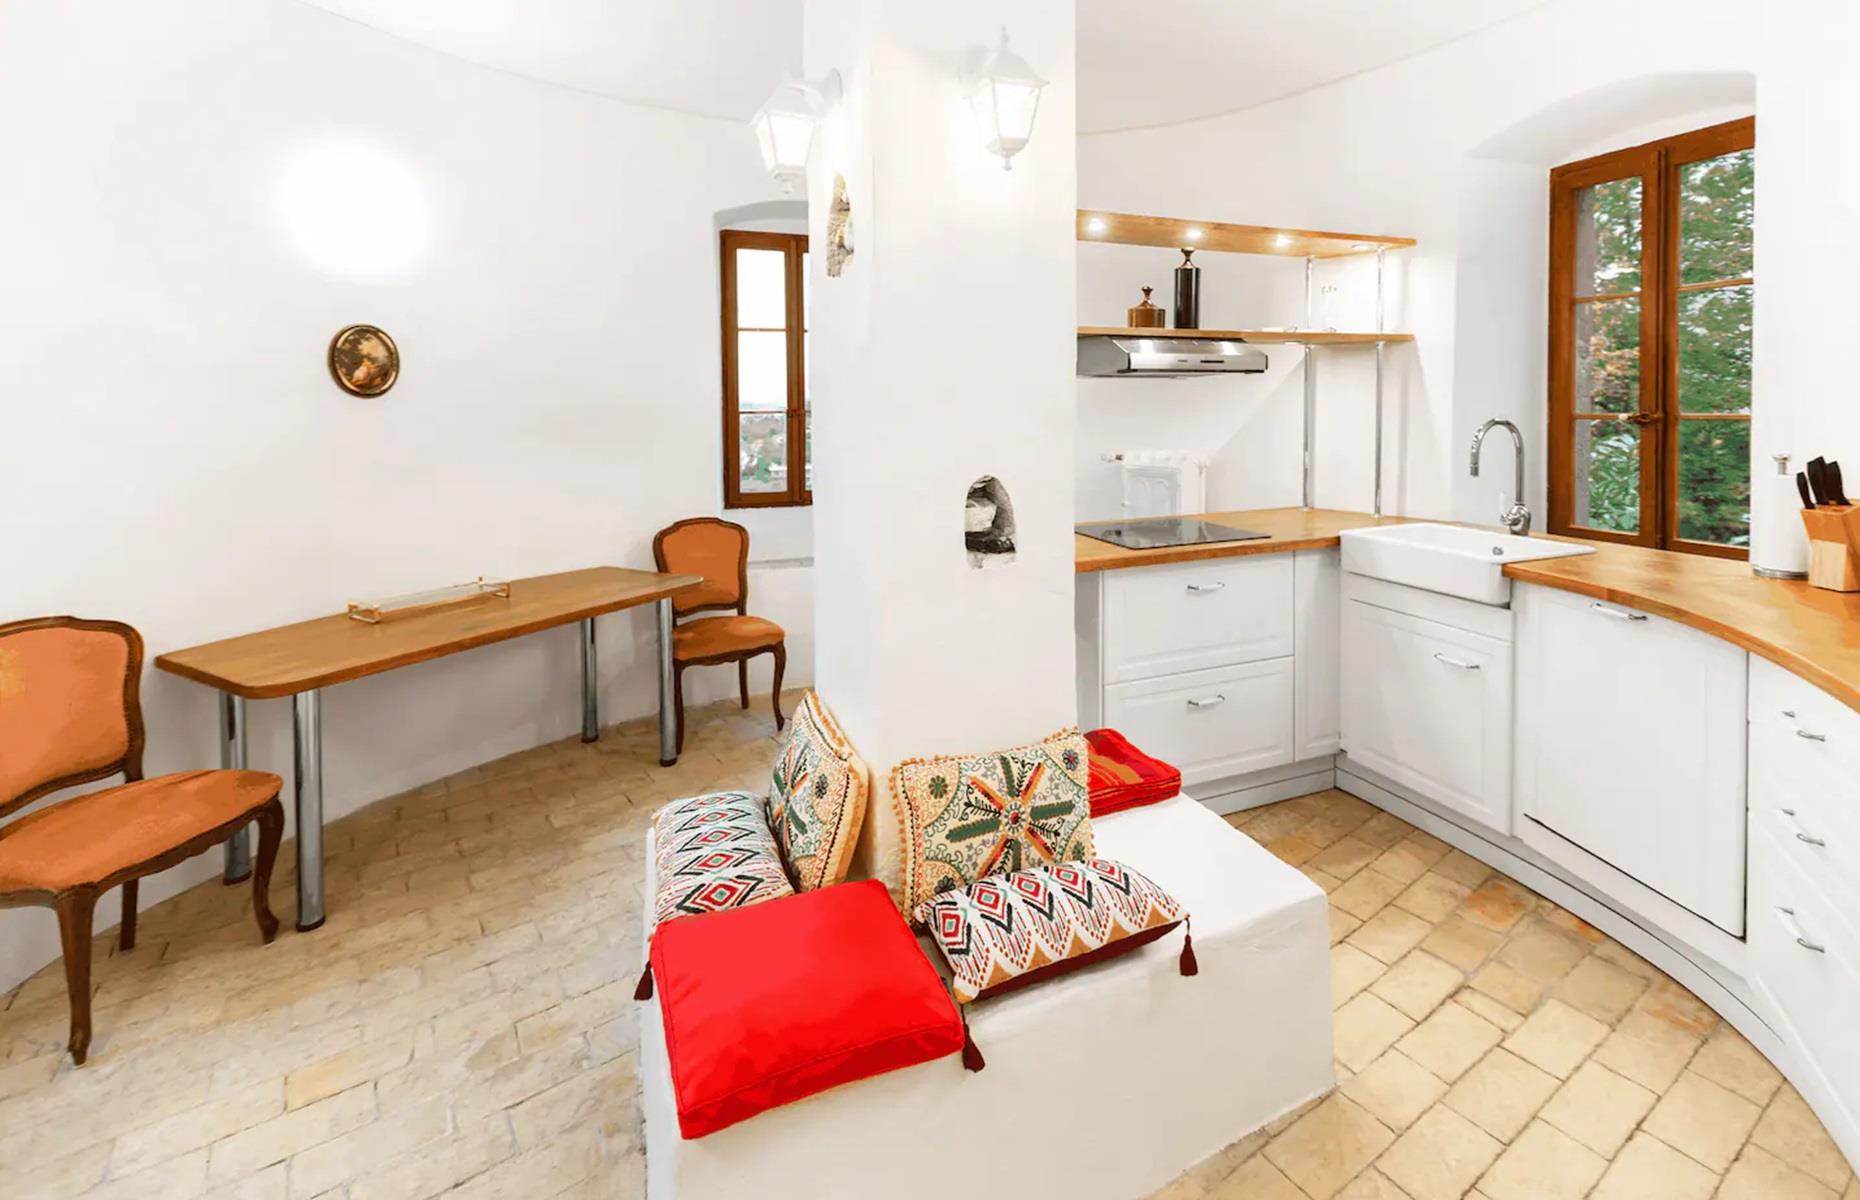 <p>The castle is home to endless suites and apartments and this particular one is available to rent <a href="https://www.airbnb.co.uk/rooms/40606474?source_impression_id=p3_1716963577_rFeYIfkDWDXLcP7z">via Airbnb</a>.</p>  <p>Quirky and full of character, the apartment comes complete with an open-plan living space, with a bed tucked away in an alcove. There's also a rounded kitchen with a dining zone.</p>